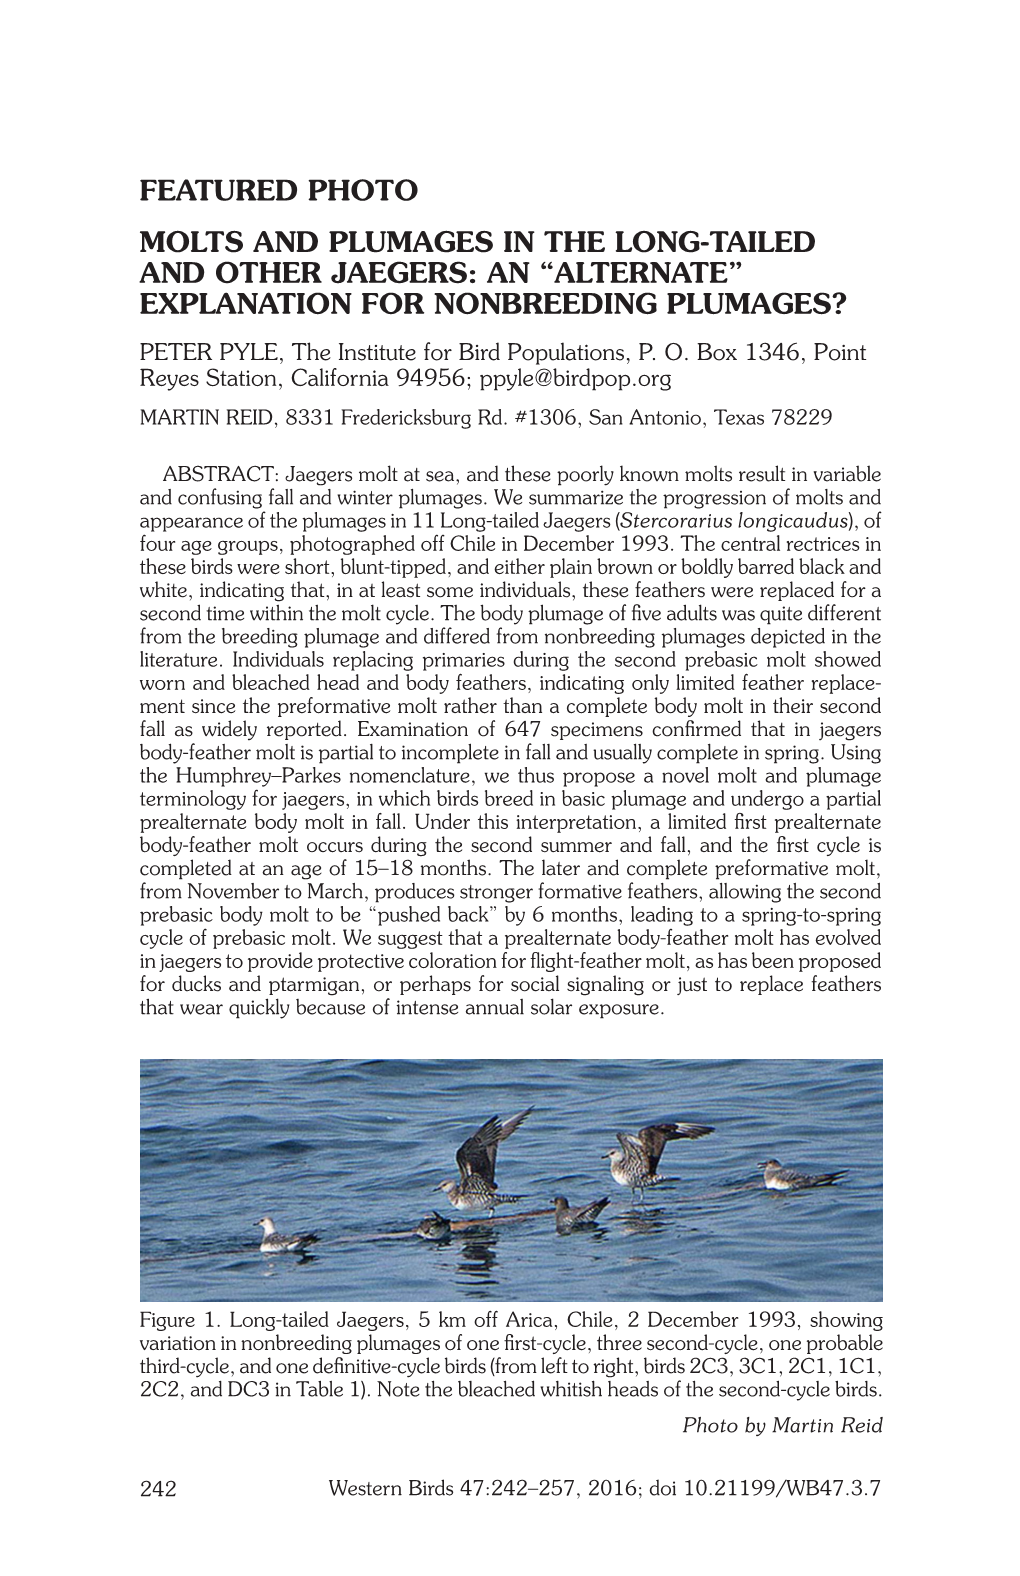 MOLTS and PLUMAGES in the LONG-TAILED and OTHER JAEGERS: an “ALTERNATE” EXPLANATION for NONBREEDING PLUMAGES? PETER PYLE, the Institute for Bird Populations, P